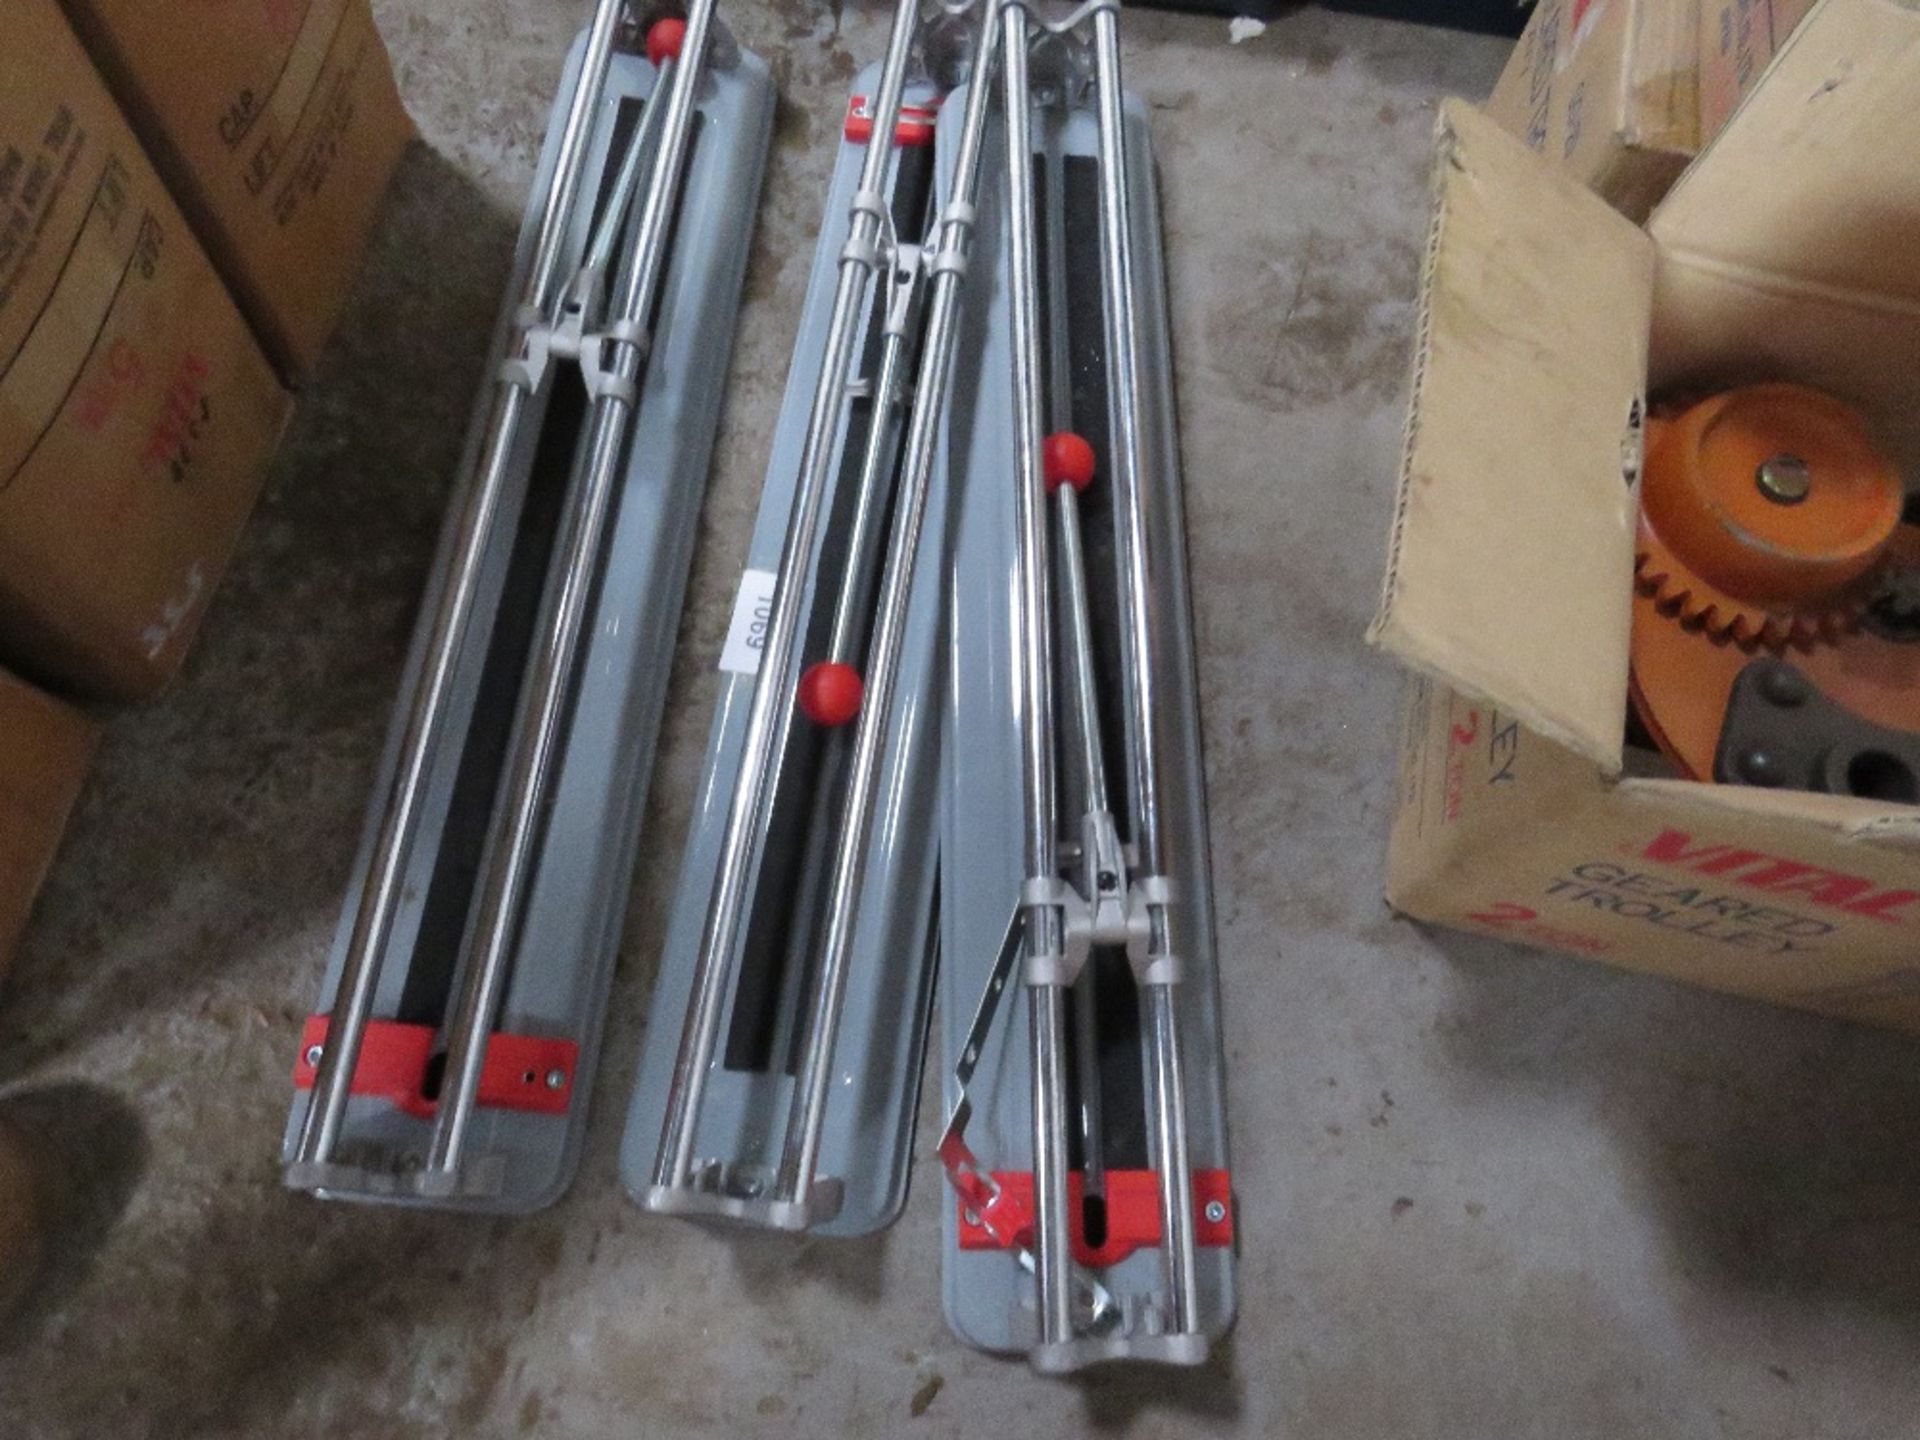 3X RUBI TILE CUTTERS LITTLE USED - Image 2 of 3